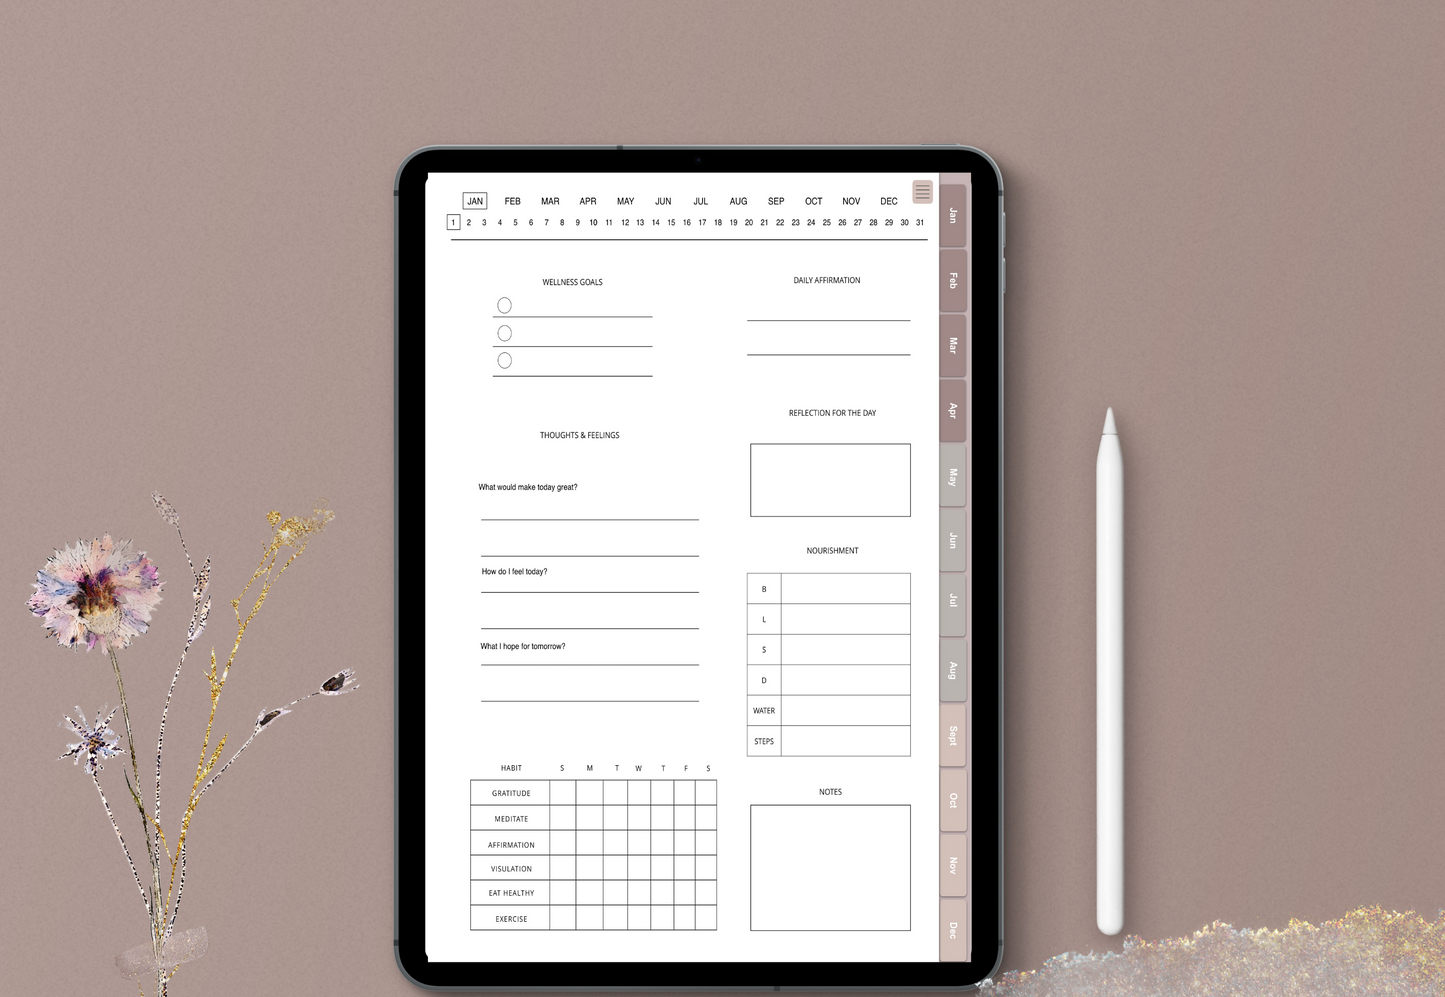 Digital Daily Journal, Self Care, And Wellness Journal Package